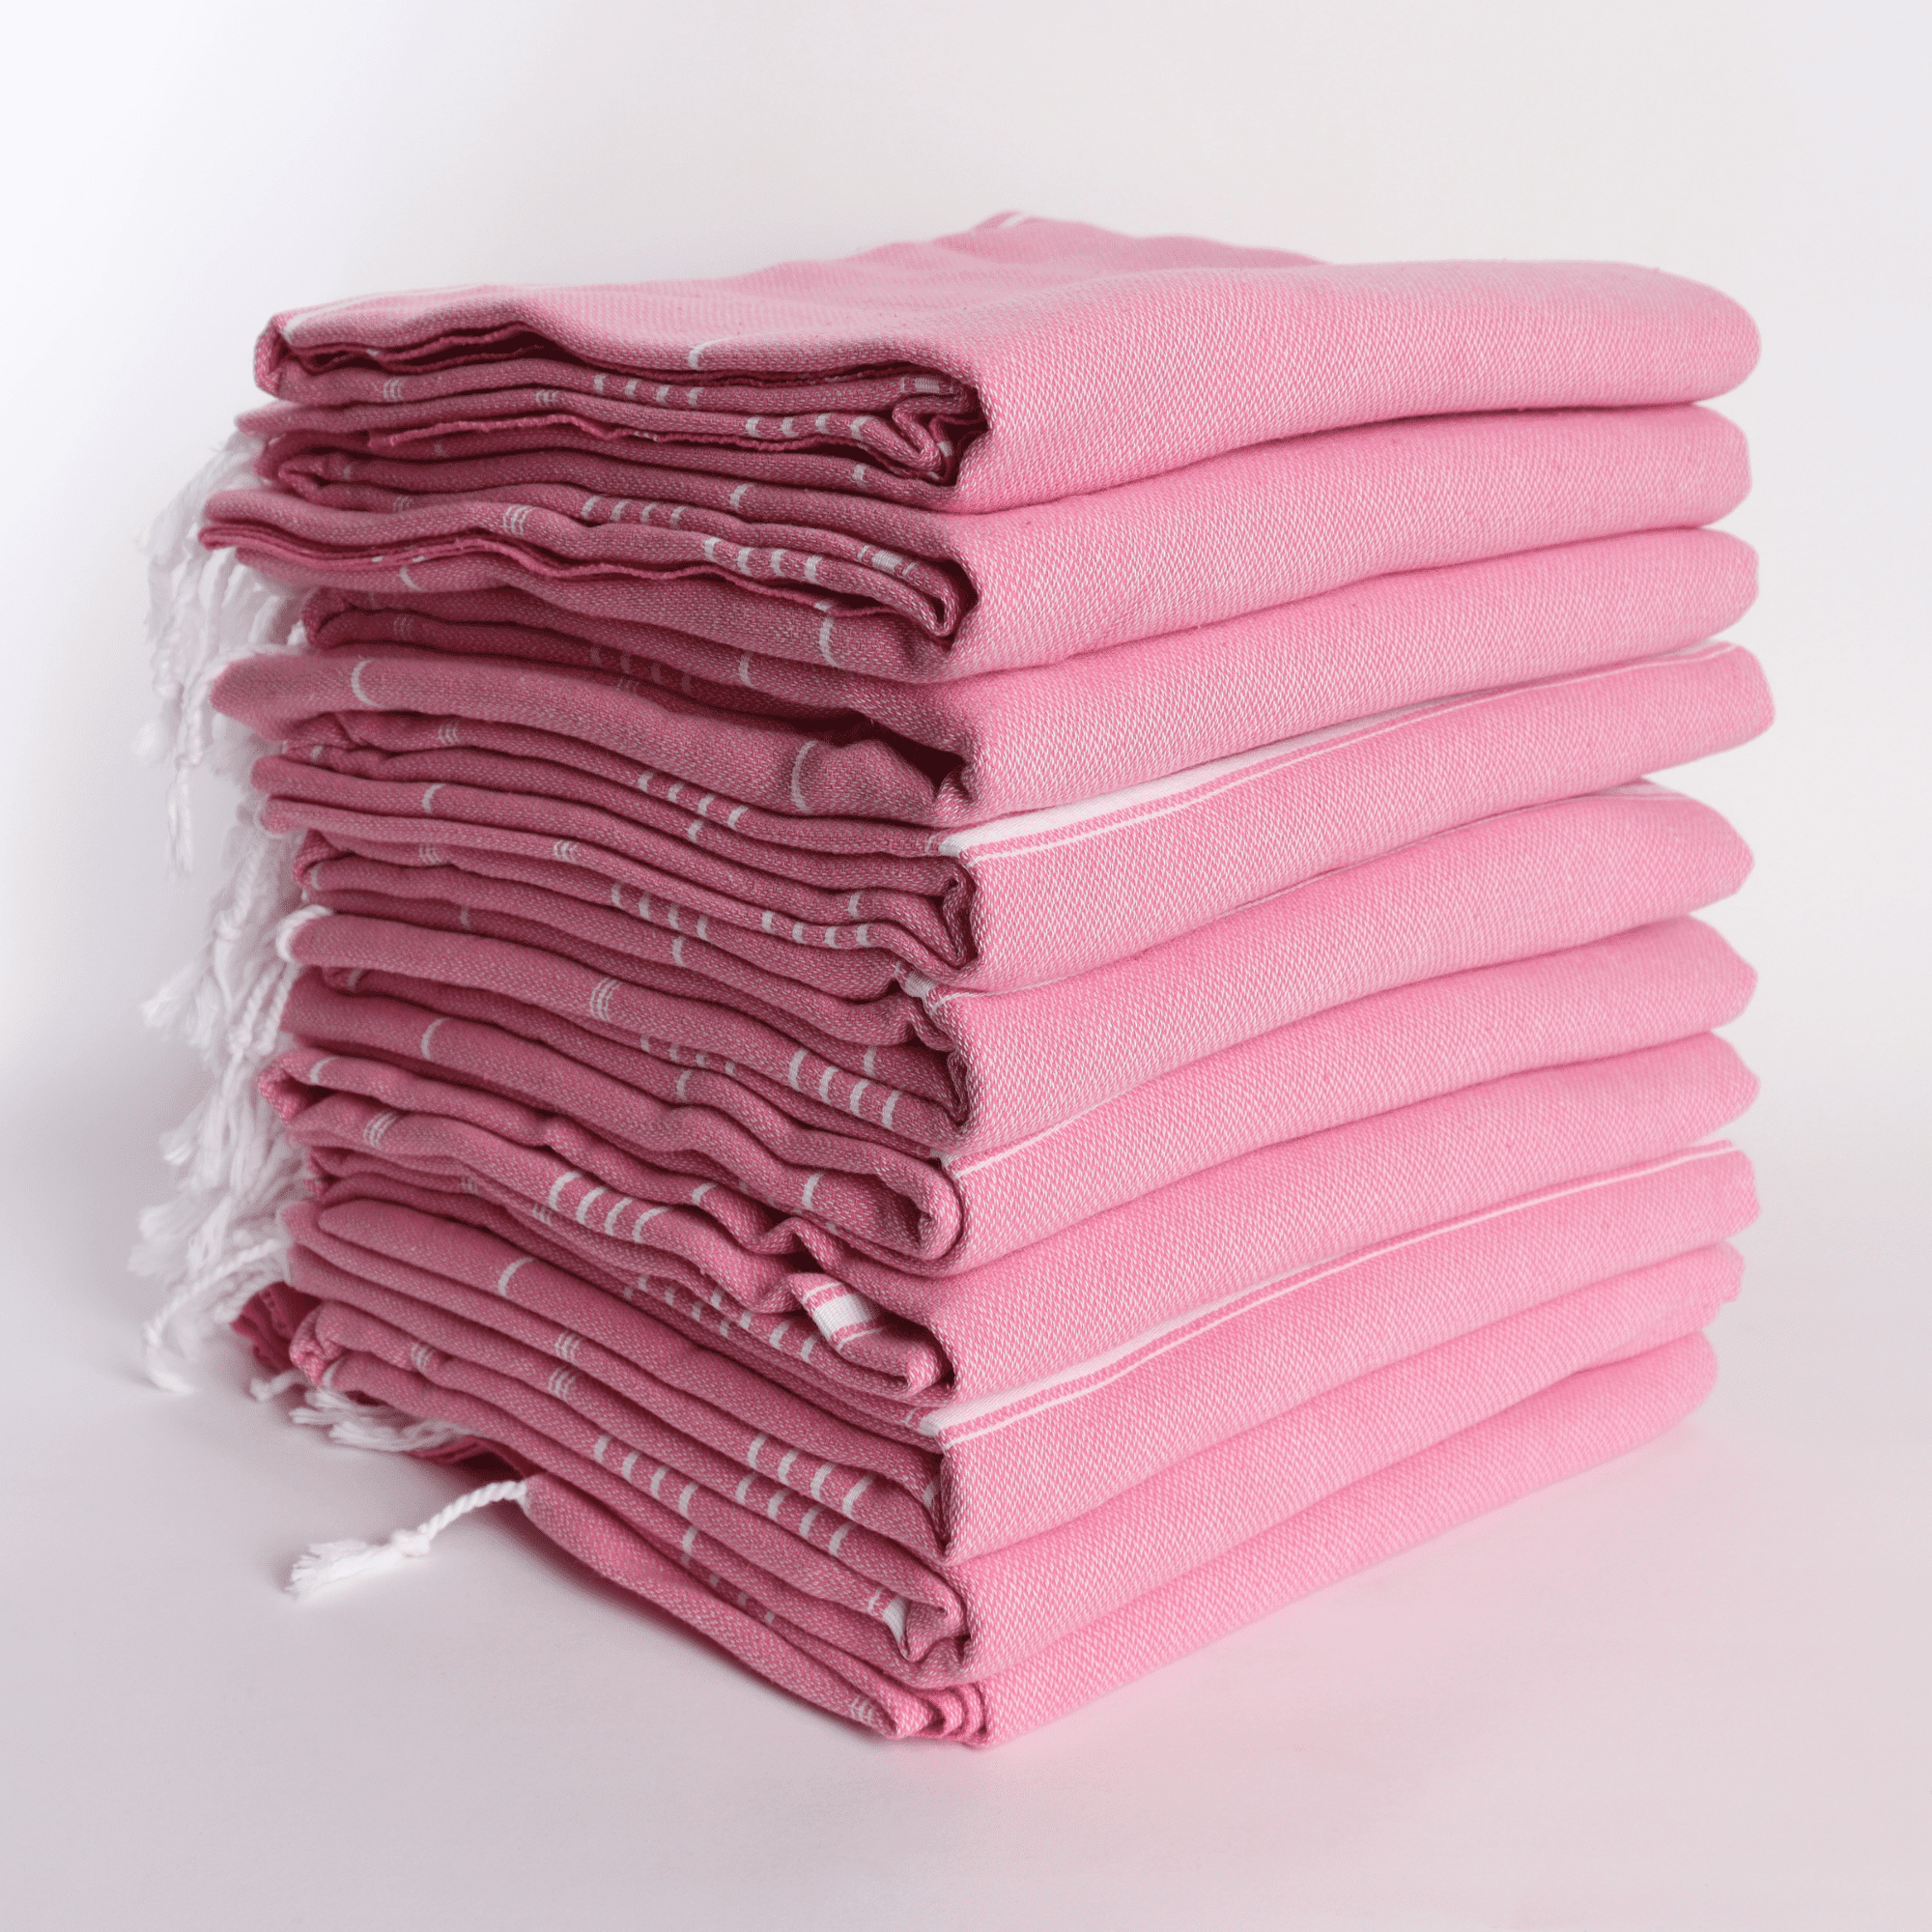 Pack of 10 Towels Pink Bachelorette Party Towel, 100% Turkish Cotton Beach Towel